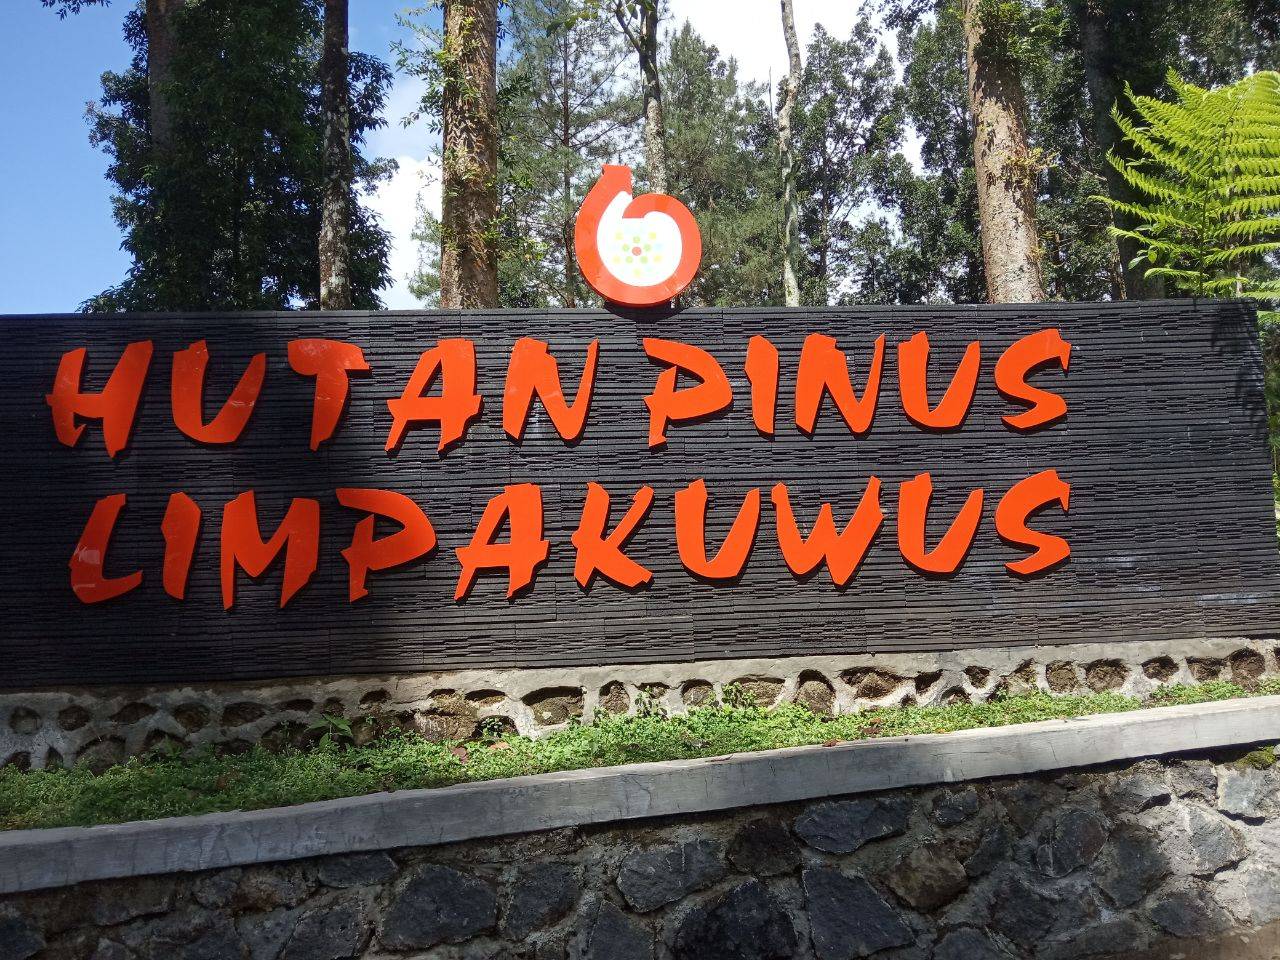 Exclusive Moment at Limpak Kuwus Pine Forest